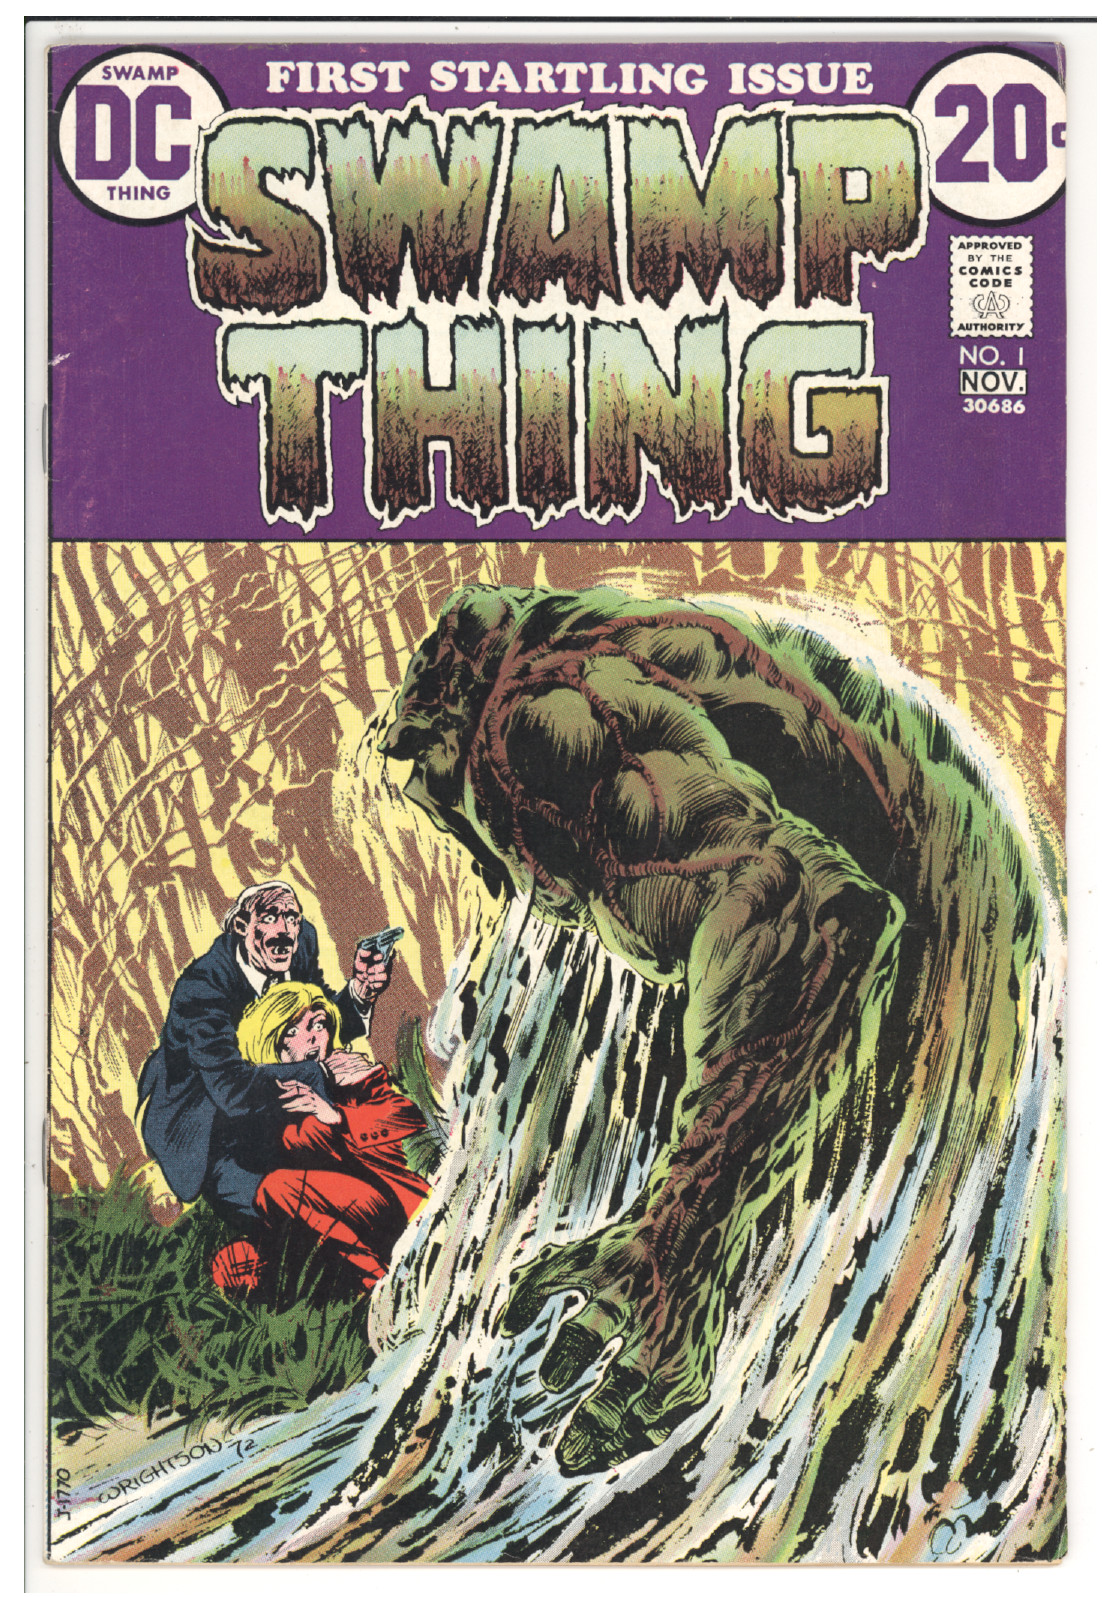 Swamp Thing #1 front